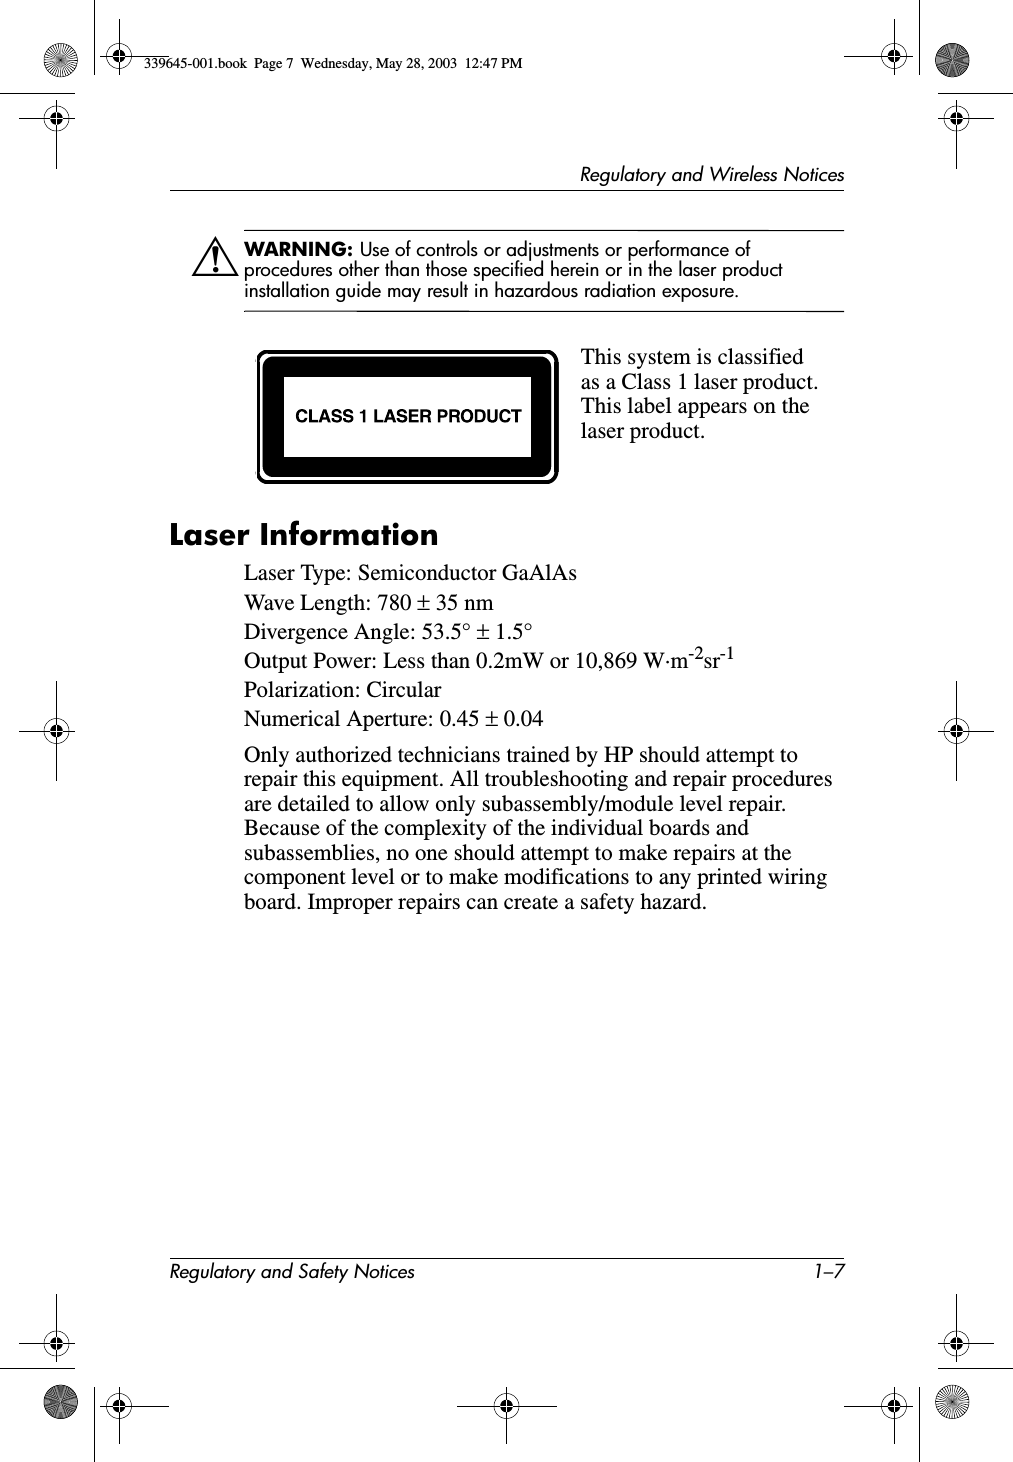 Regulatory and Wireless NoticesRegulatory and Safety Notices 1–7ÅWARNING: Use of controls or adjustments or performance of procedures other than those specified herein or in the laser product installation guide may result in hazardous radiation exposure.Laser InformationLaser Type: Semiconductor GaAlAsWave Length: 780 ± 35 nmDivergence Angle: 53.5° ± 1.5°Output Power: Less than 0.2mW or 10,869 W·m-2sr-1Polarization: CircularNumerical Aperture: 0.45 ± 0.04Only authorized technicians trained by HP should attempt to repair this equipment. All troubleshooting and repair procedures are detailed to allow only subassembly/module level repair. Because of the complexity of the individual boards and subassemblies, no one should attempt to make repairs at the component level or to make modifications to any printed wiring board. Improper repairs can create a safety hazard.This system is classified as a Class 1 laser product. This label appears on the laser product.339645-001.book  Page 7  Wednesday, May 28, 2003  12:47 PM